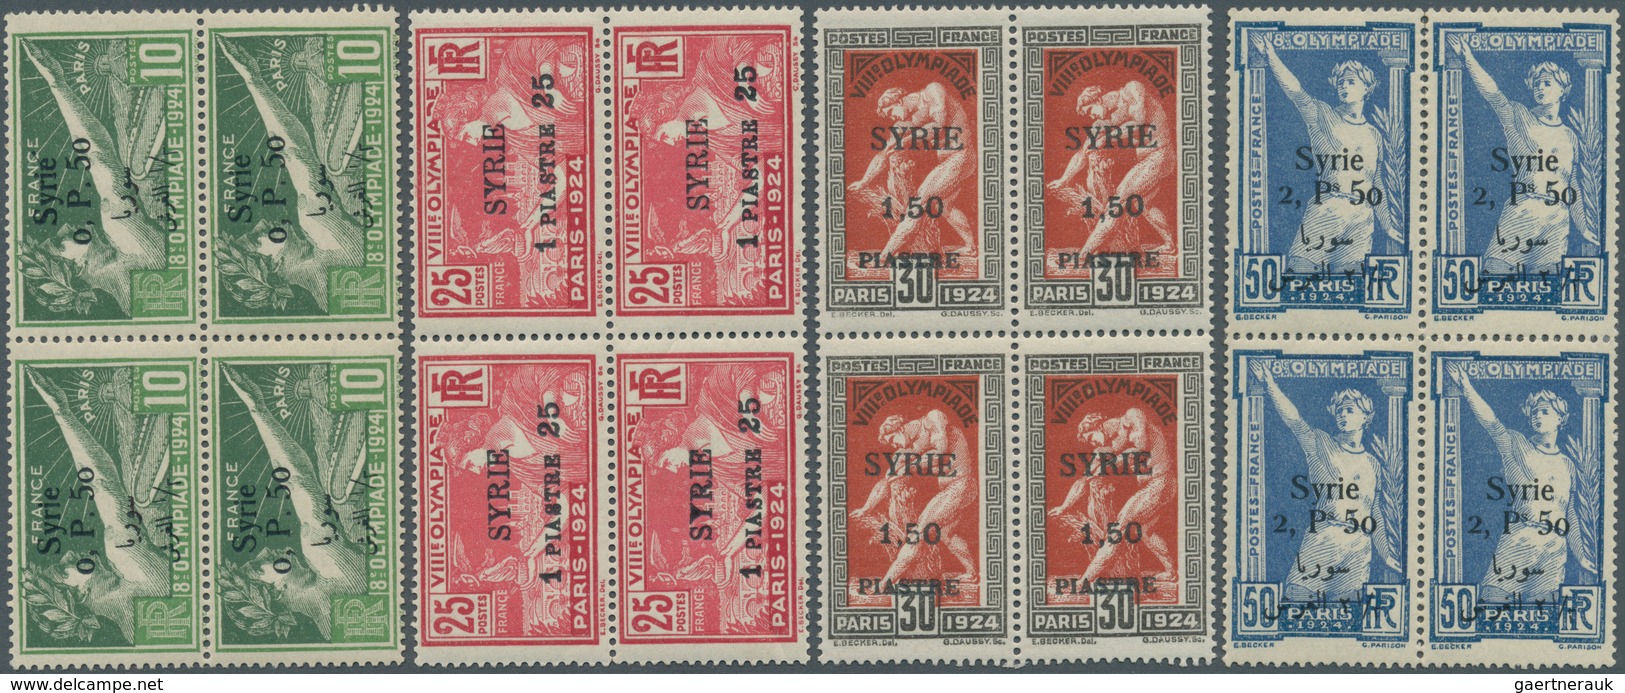 Syrien: 1920/1956, specialised assortment incl. imperf. issues, interesting covers, varieties, Olymp